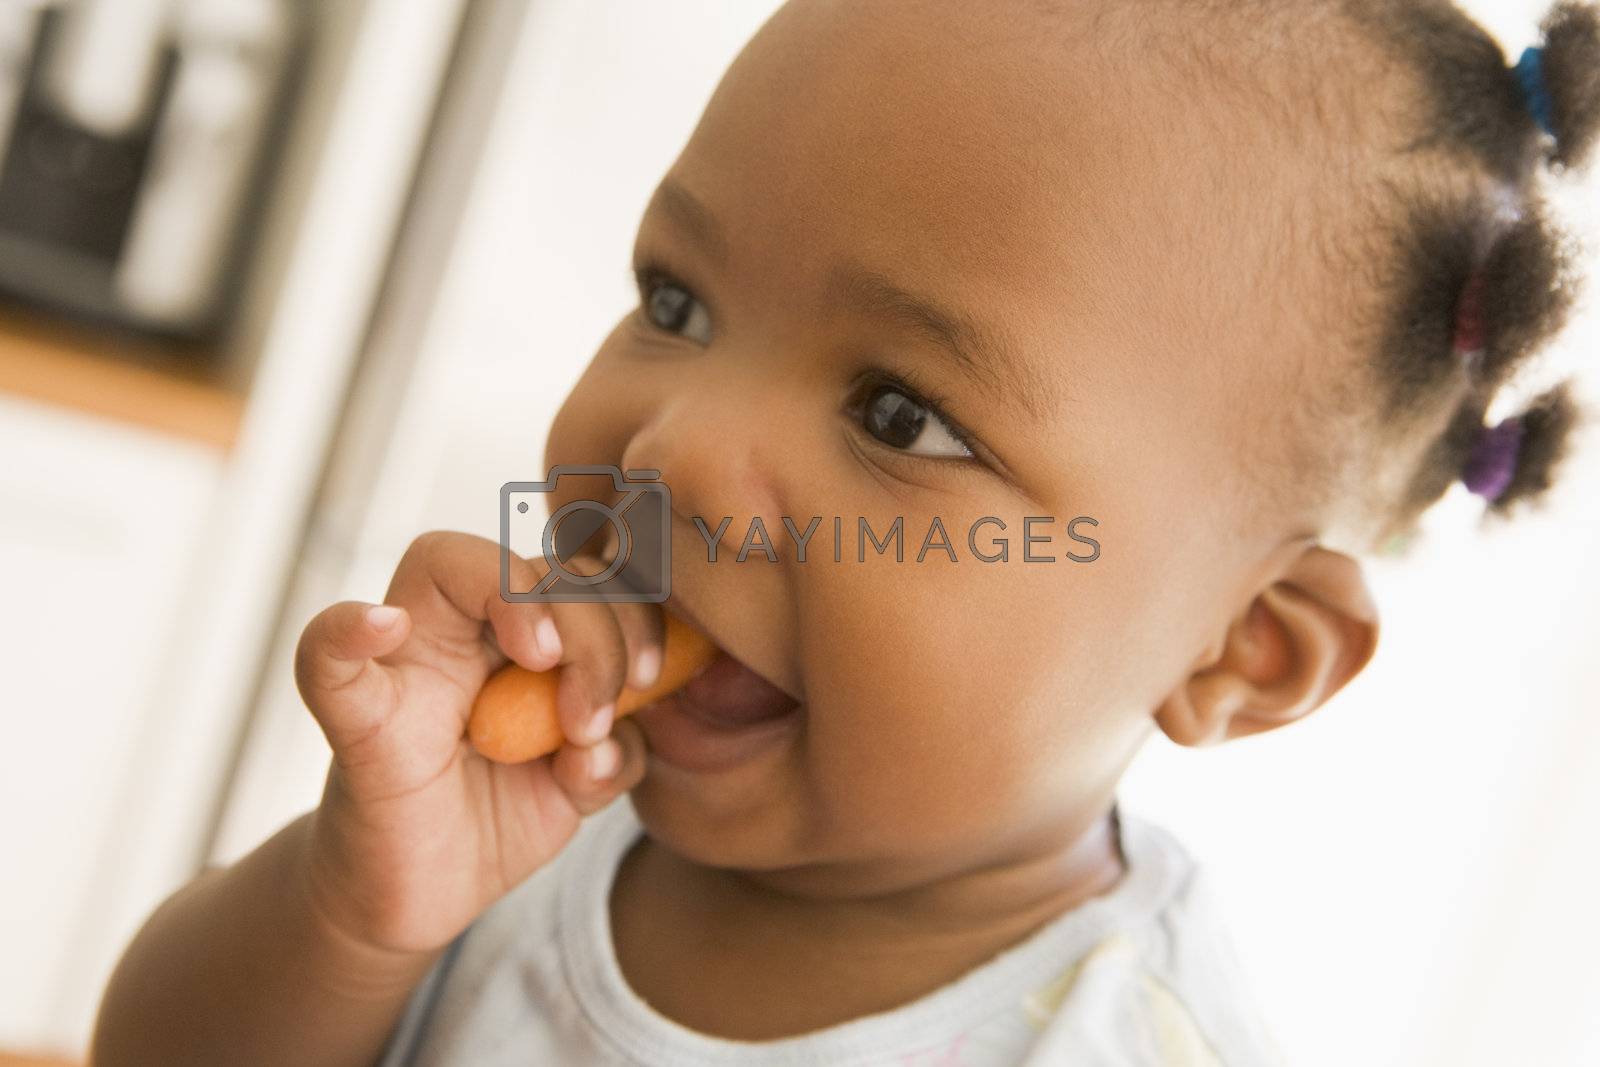 Royalty free image of Young girl eating carrot indoors by MonkeyBusiness